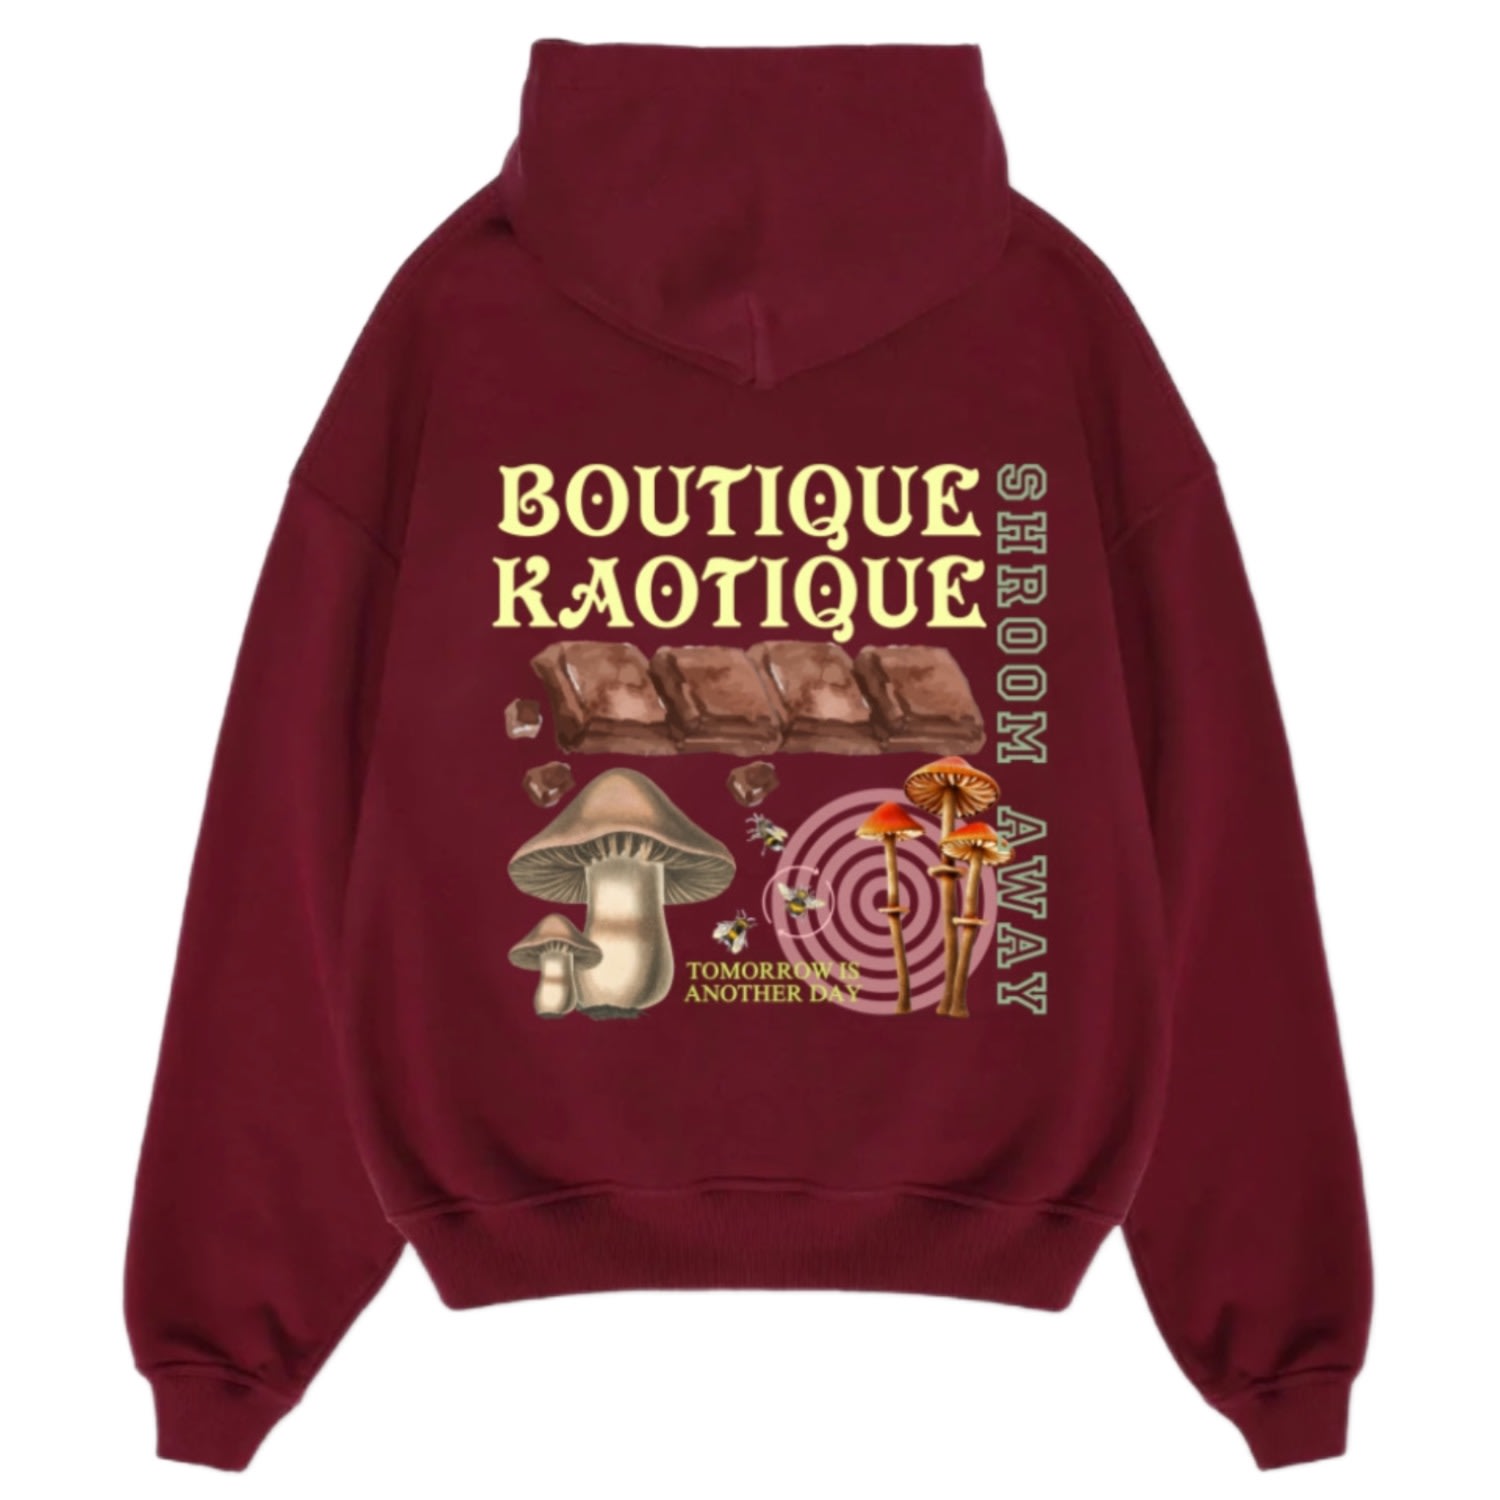 Women’s Red Shroom Away Burgundy Organic Cotton Hoodie Small Boutique Kaotique